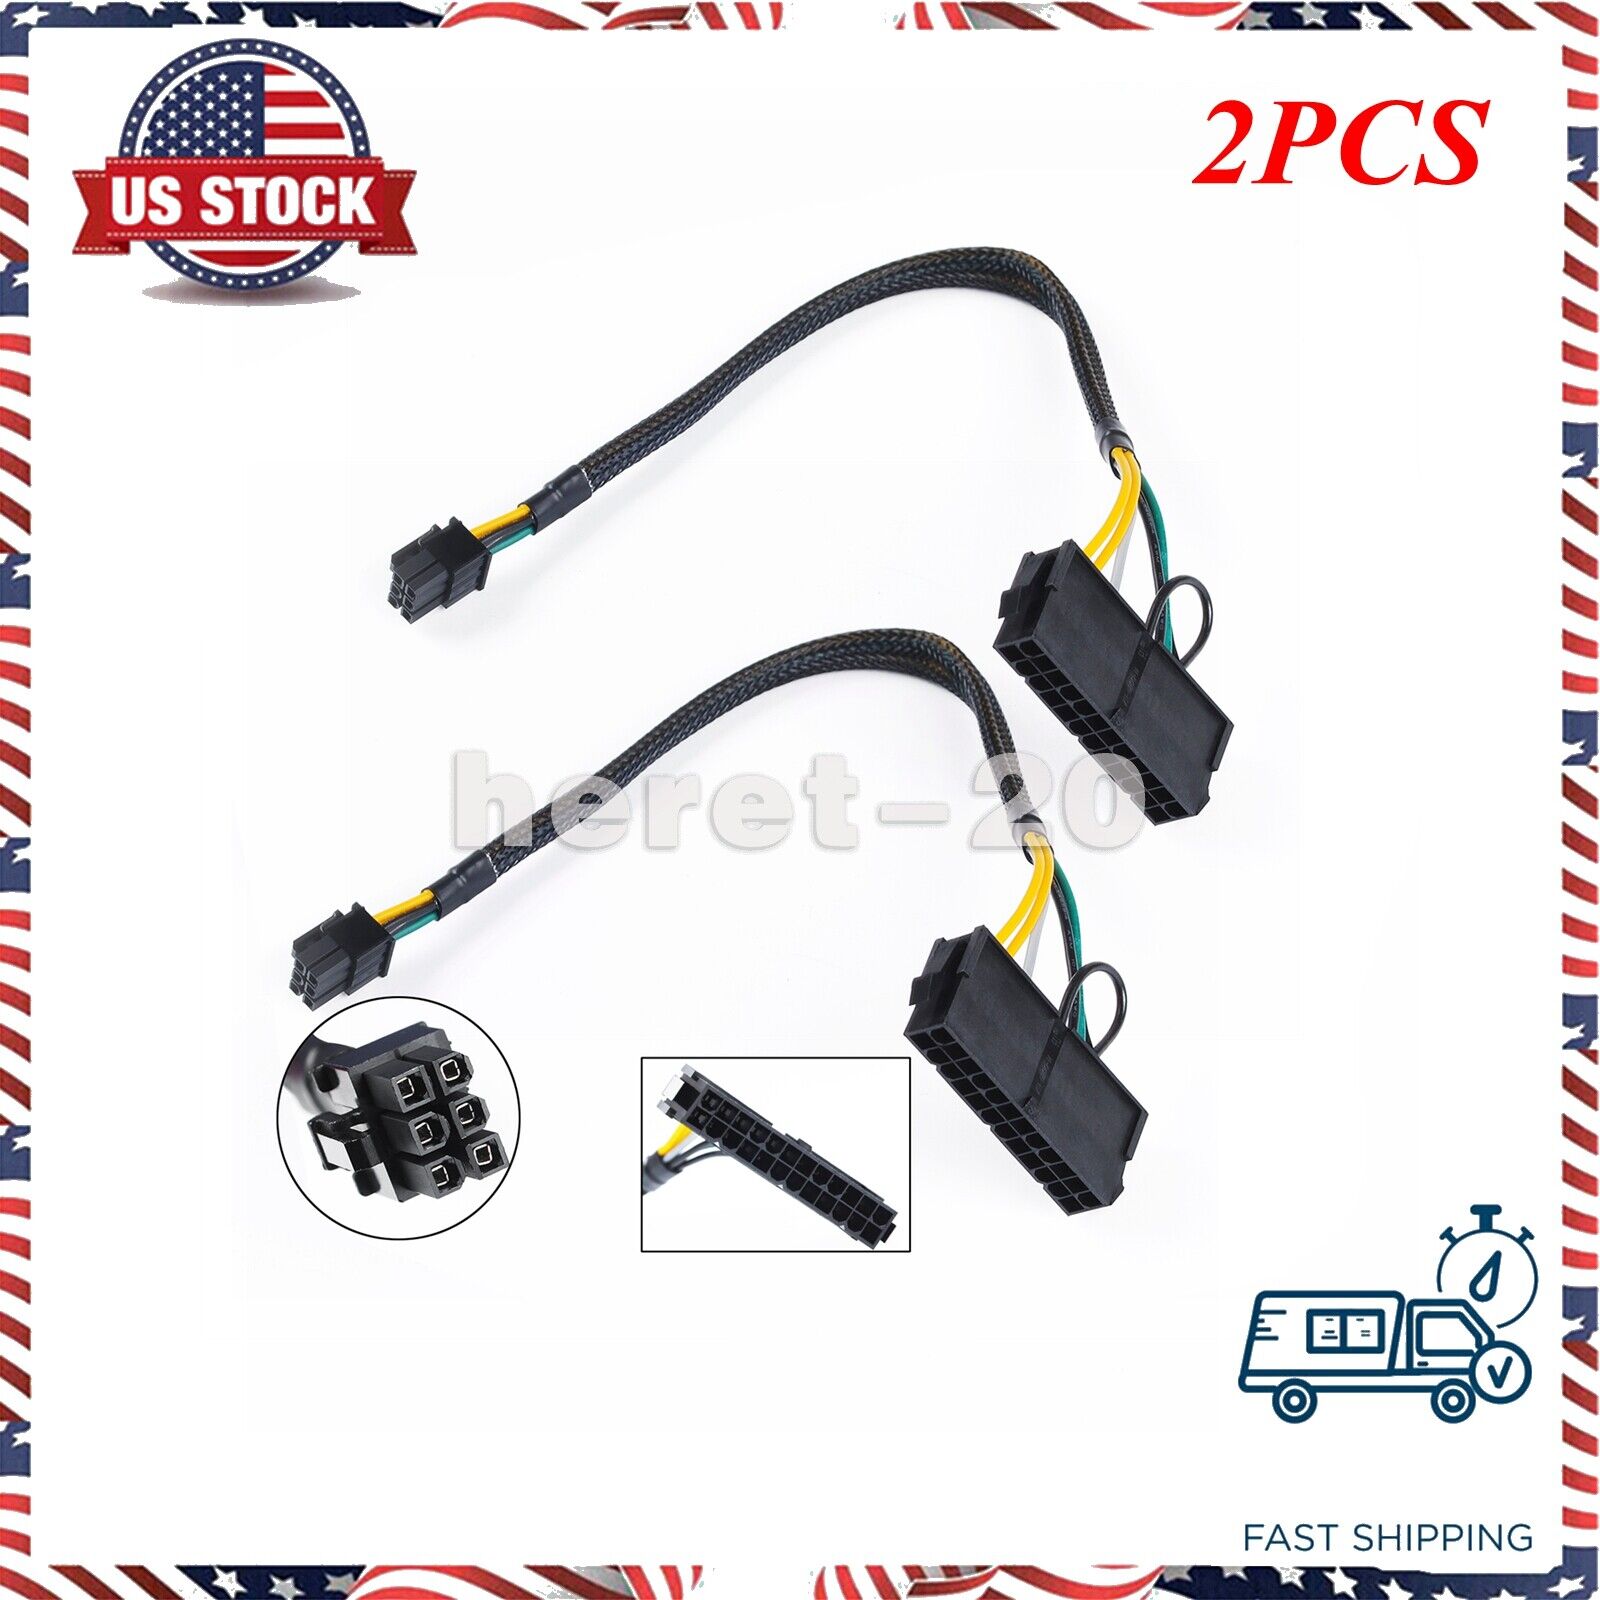 2PCS ATX 24 pin to 6pin Power Supply Cable for DELL Optiplex 3050 3060 3080 3681